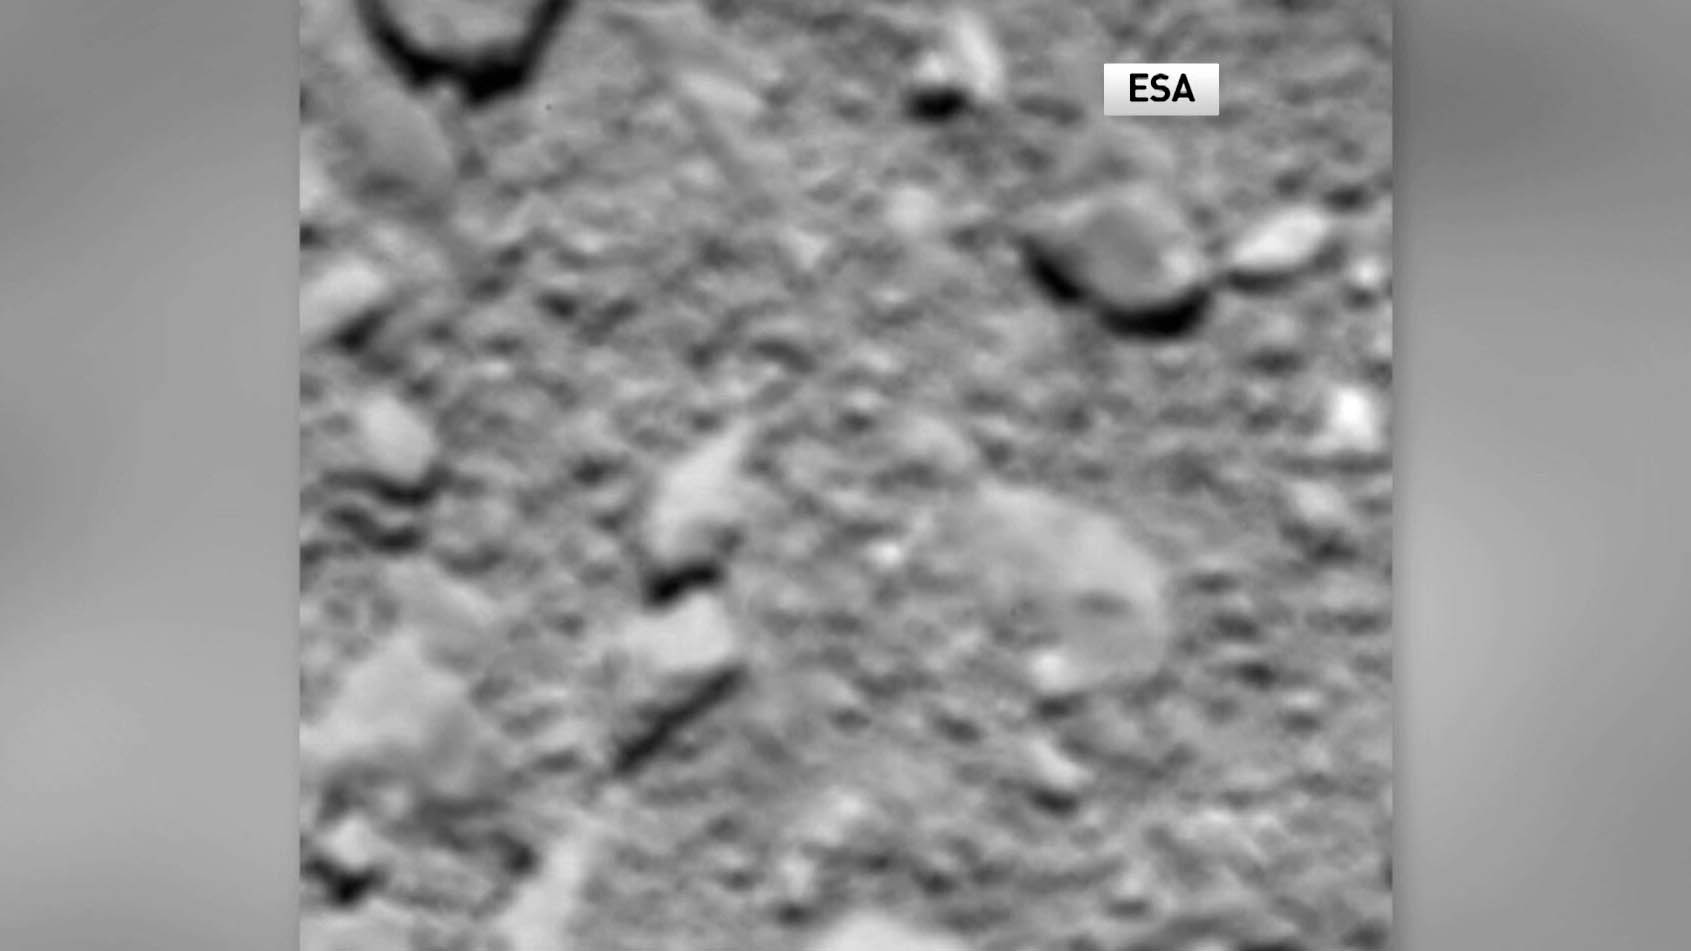 Rosetta the comet chasing probe ends 12yr mission with crash